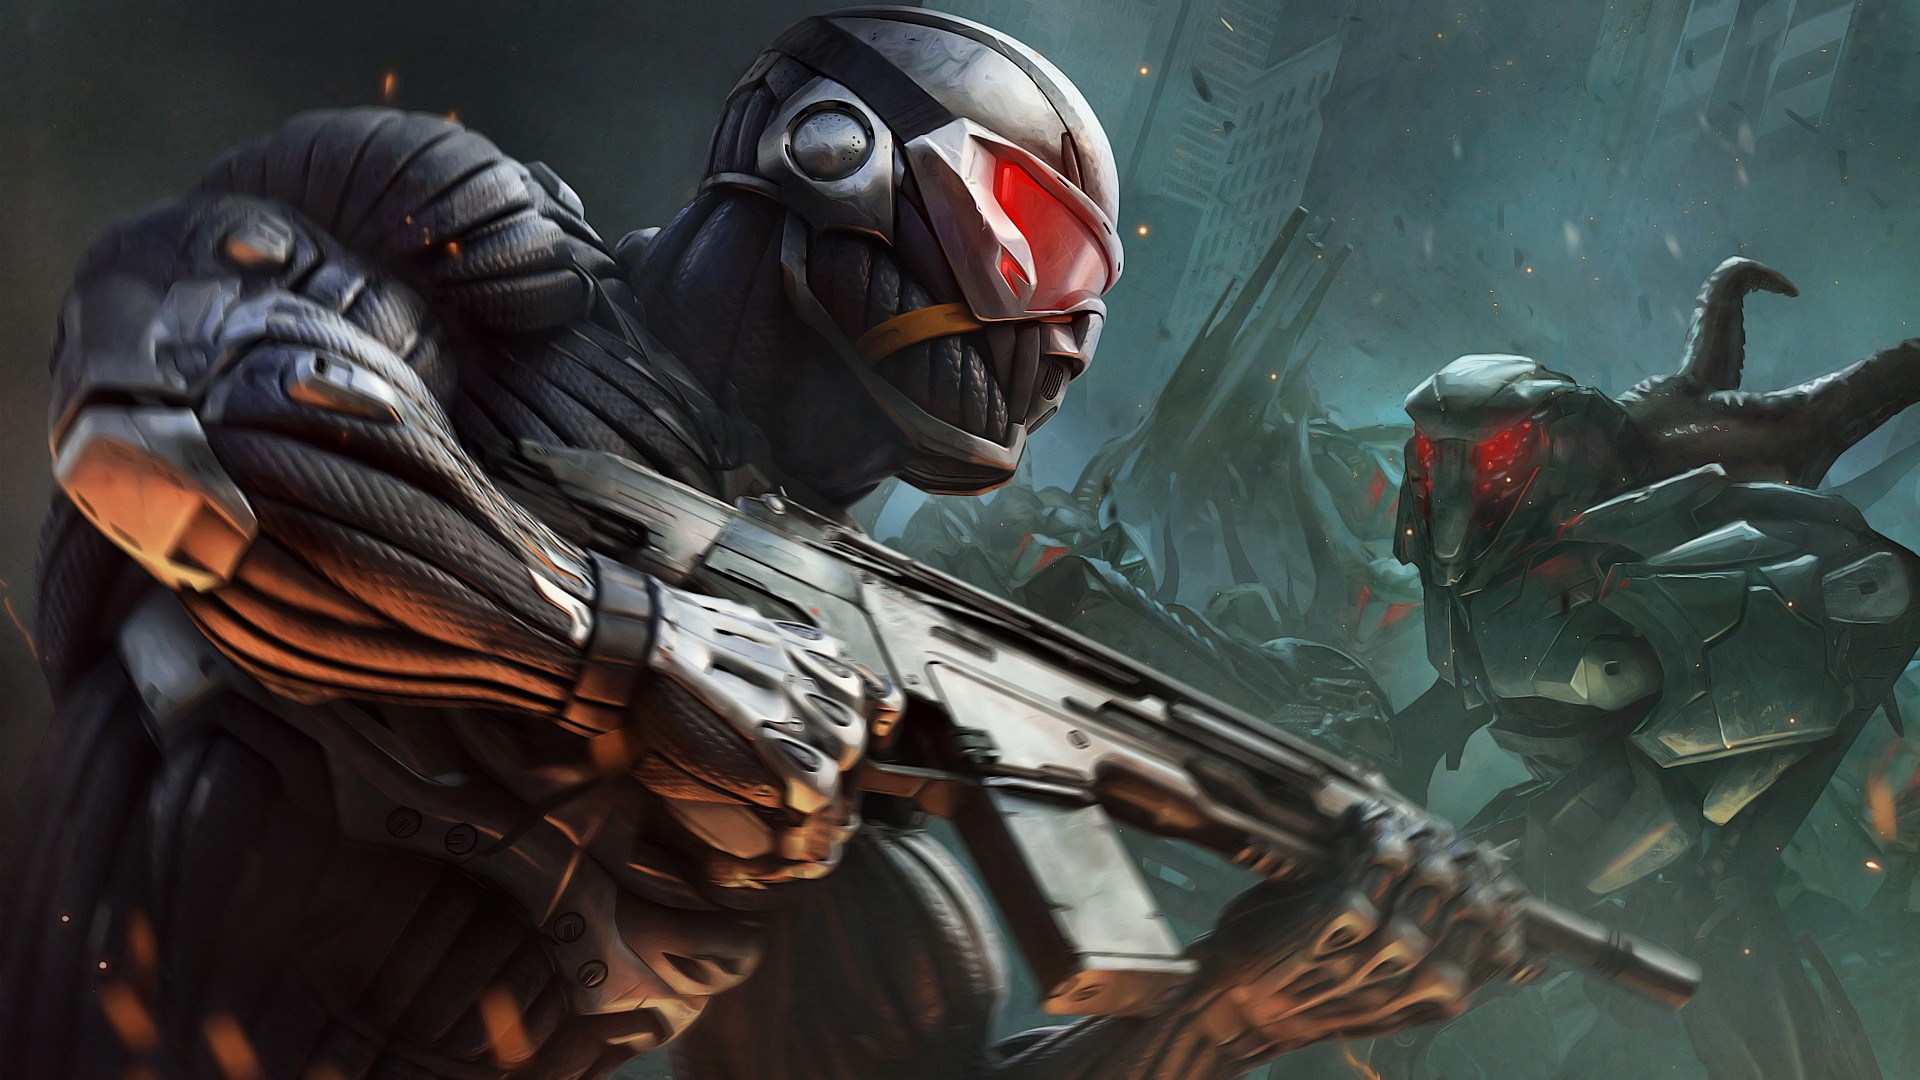 10 best crysis 3 wallpaper hd full hd 1080p for pc on crysis 3 wallpaper